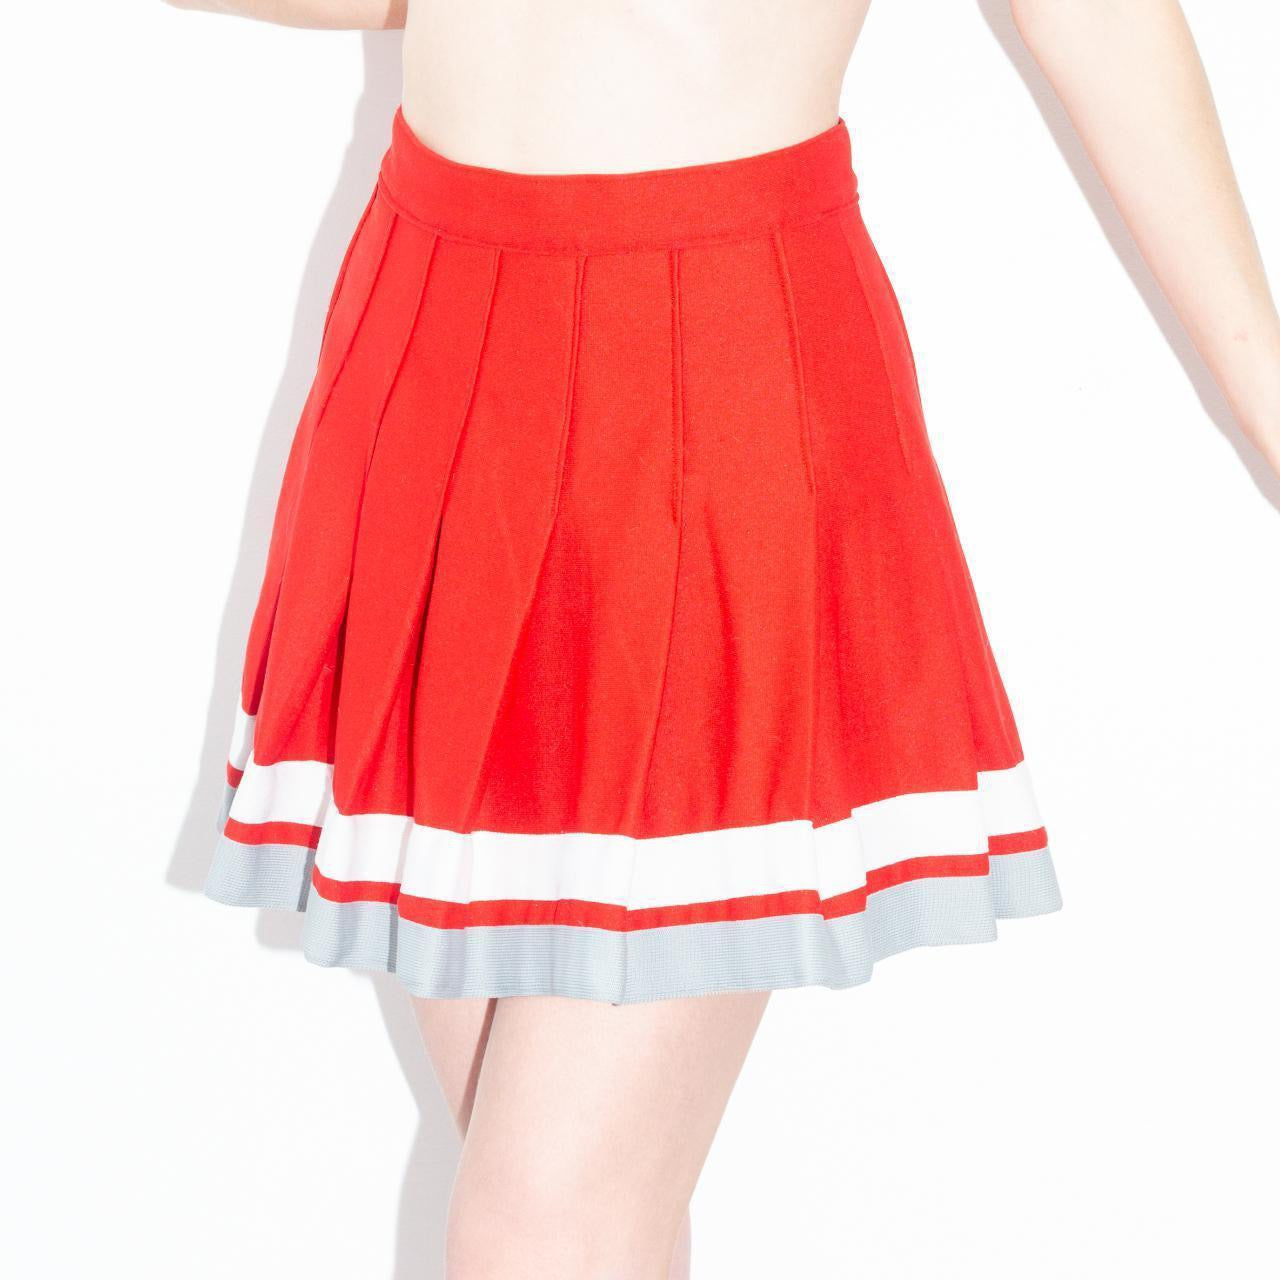 Y2K Red and Gray Pleated Cheerleader Uniform Skirt